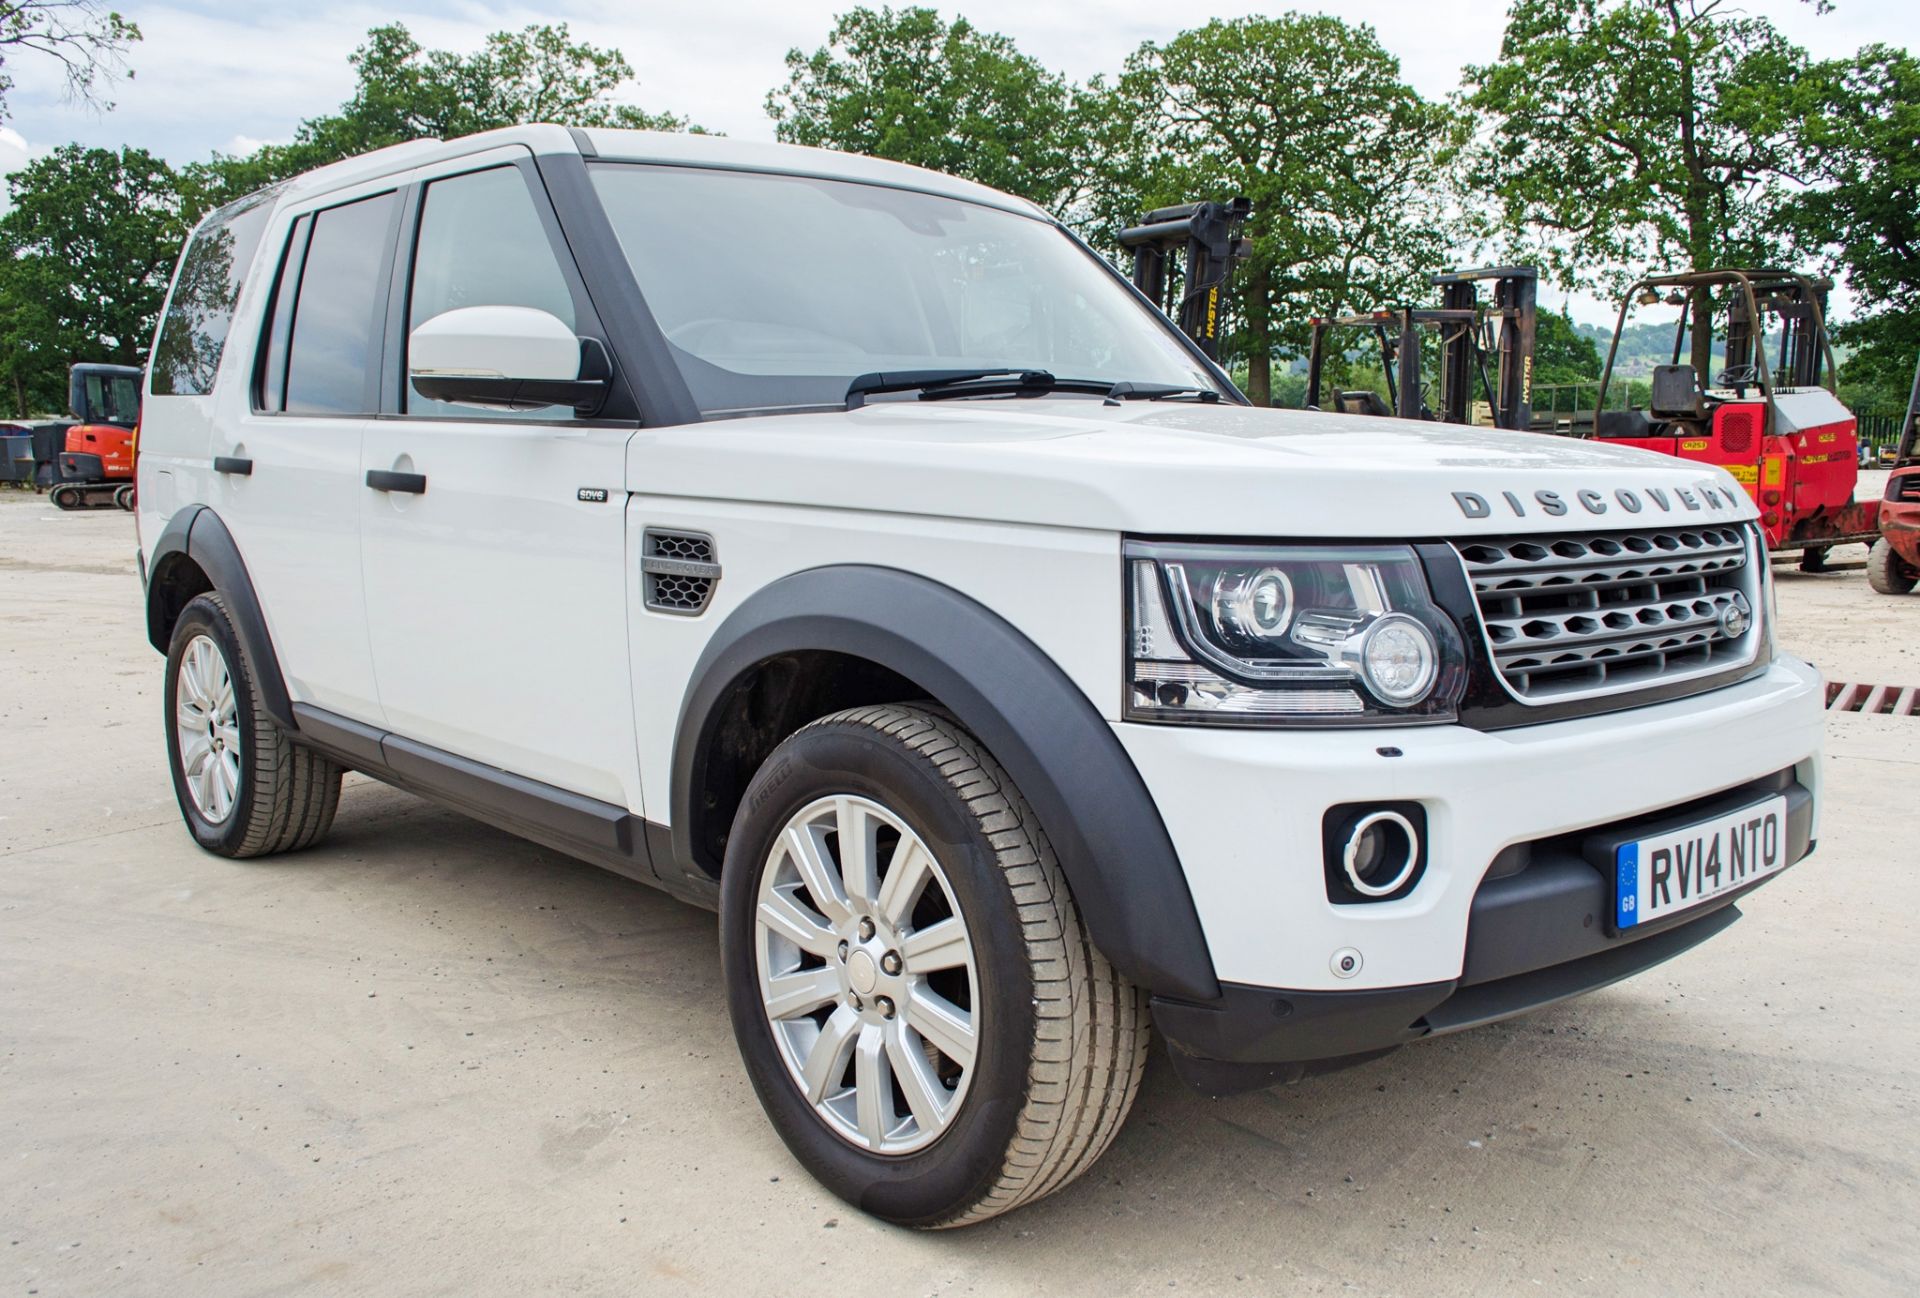 Land Rover Discovery 4 3.0 SDV6 255 XS Commercial 4x4 utility vehicle Registration Number: RV14 - Image 2 of 33